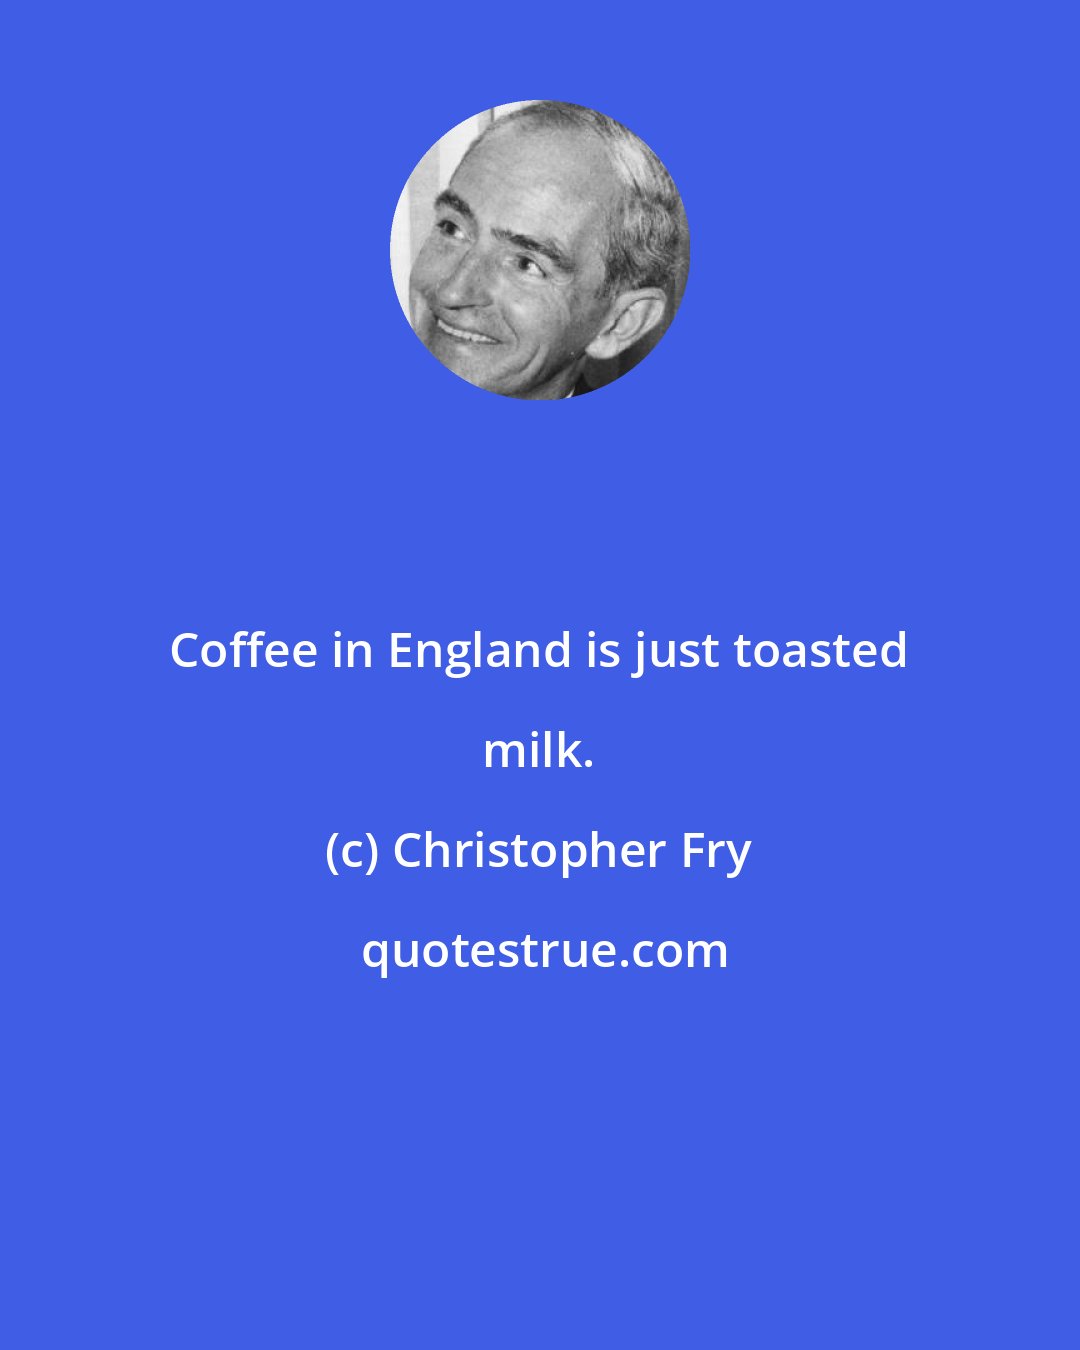 Christopher Fry: Coffee in England is just toasted milk.